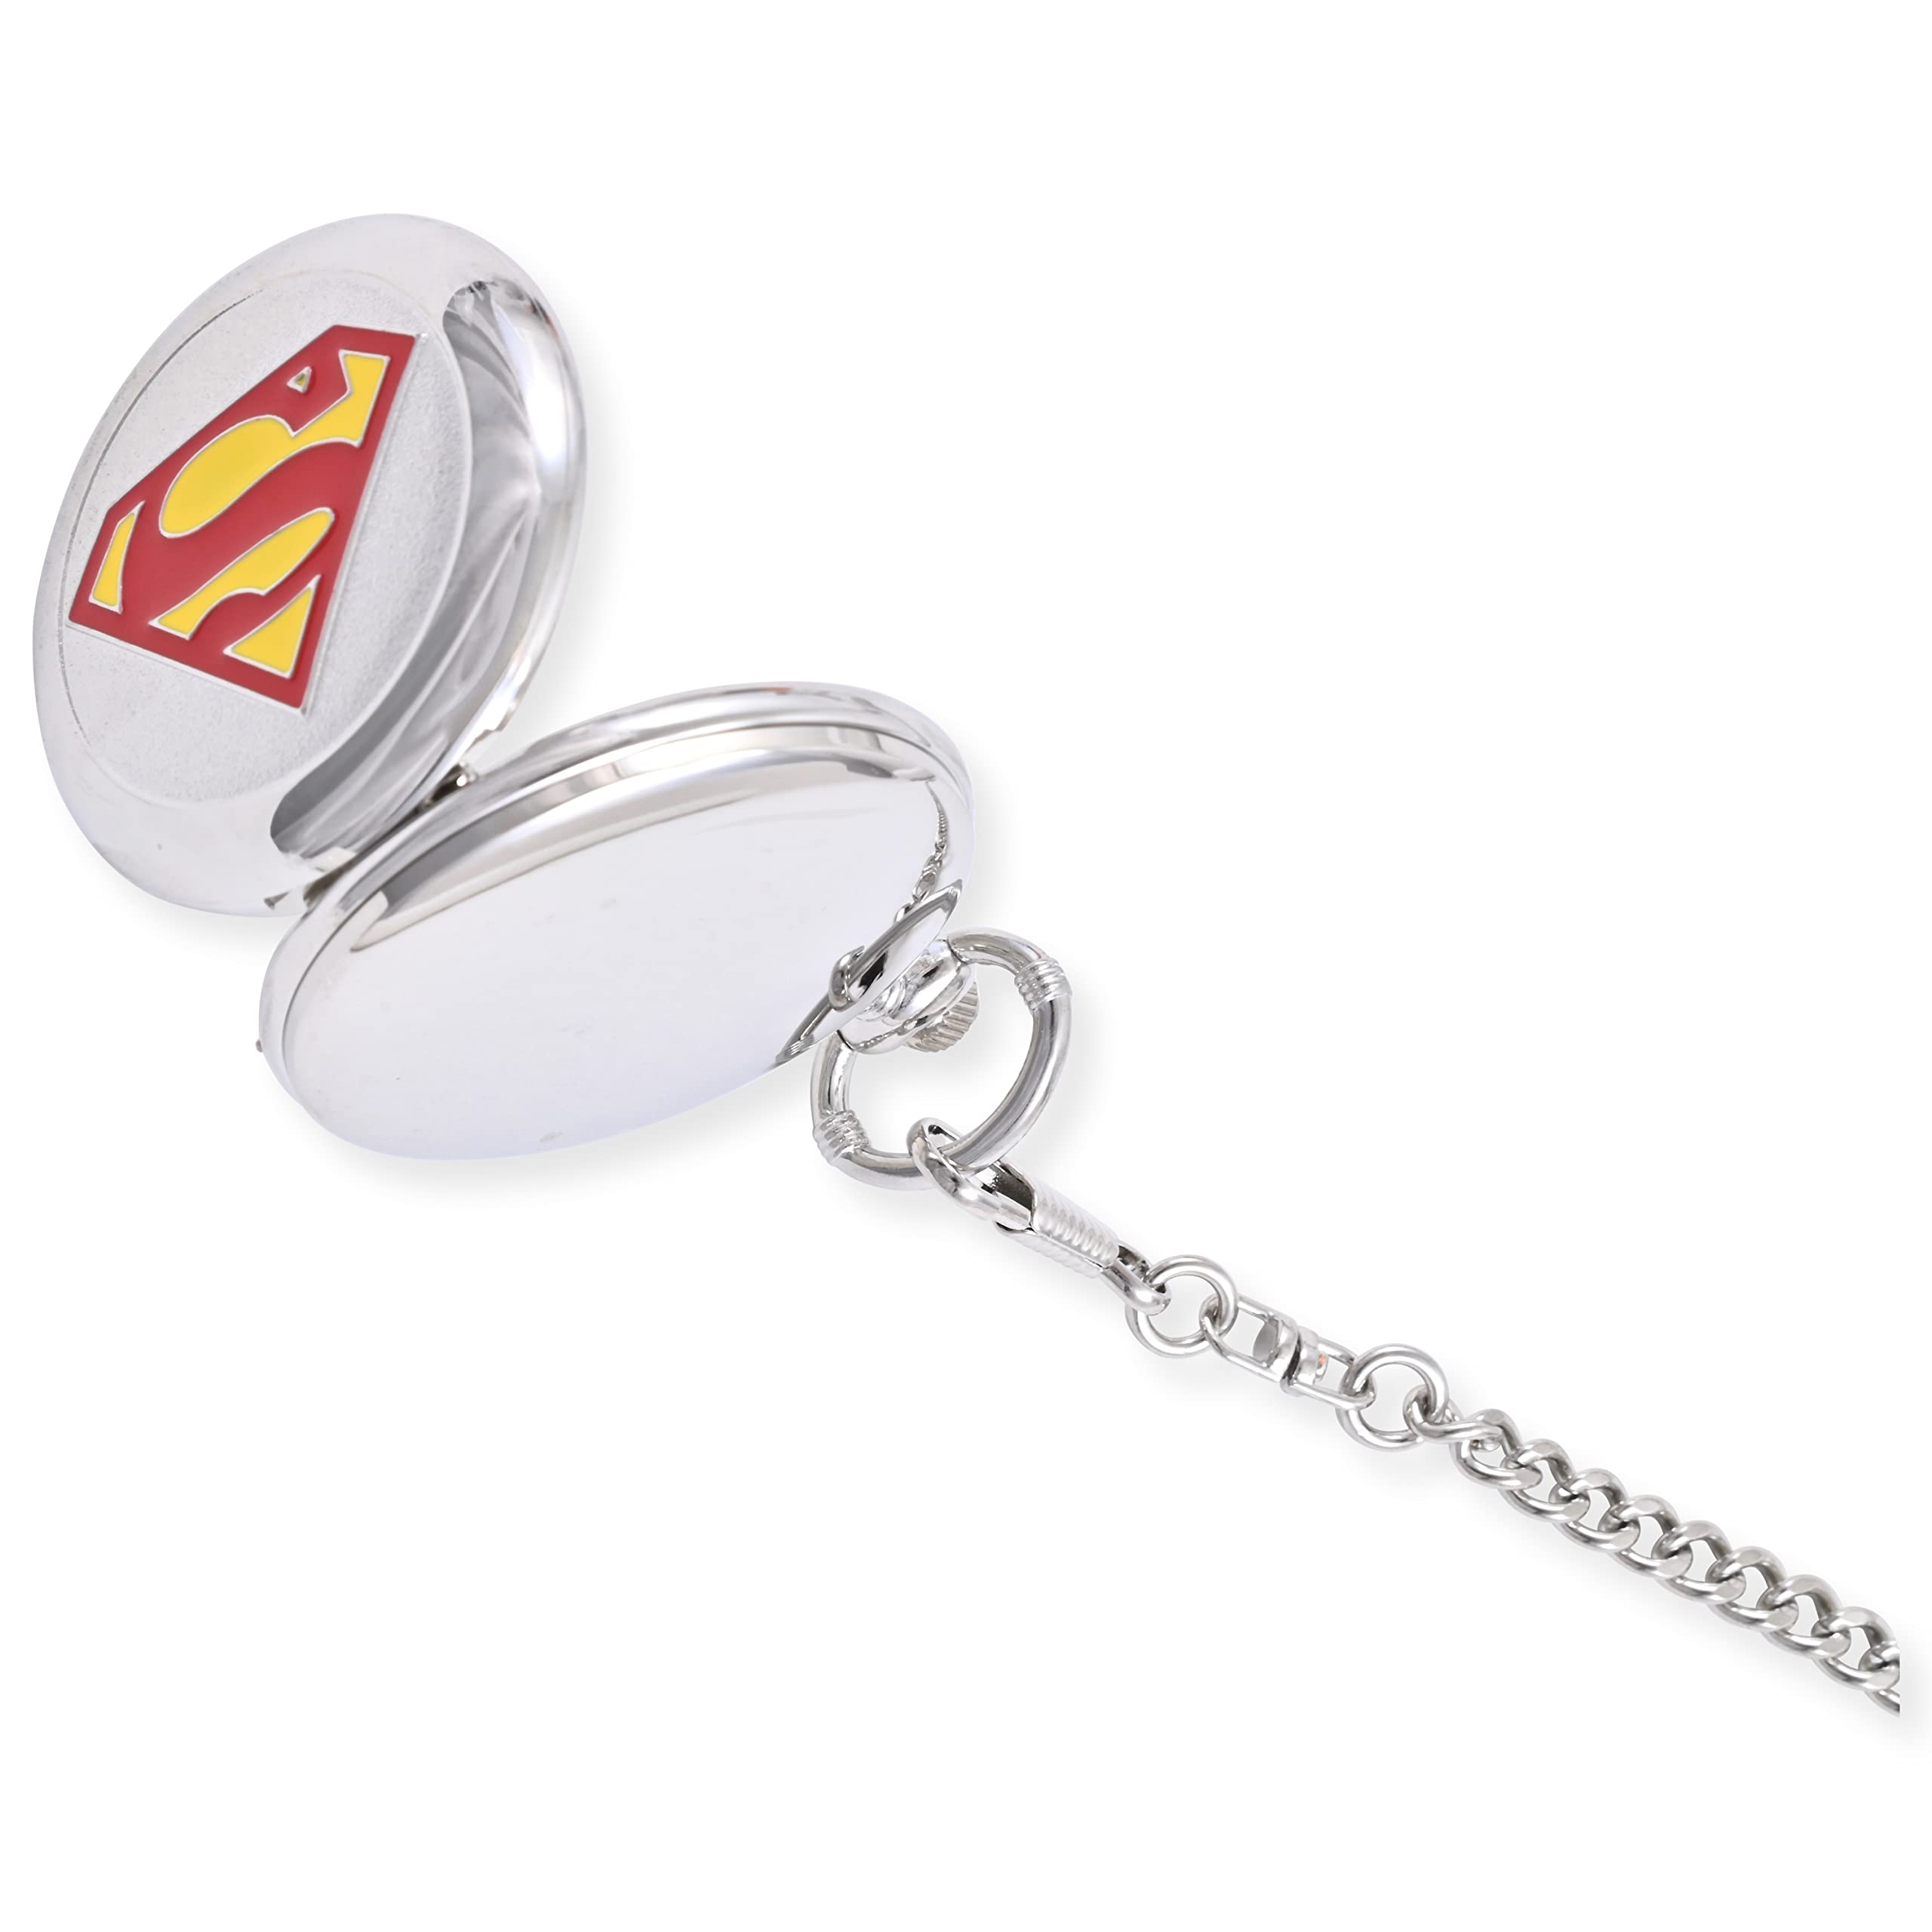 Accutime Superman Shield Analog Pocket Watch for Men - Silver Color On Cover, Pocket Watch, Male, Analog Watch (Model: SUP3073AZ)